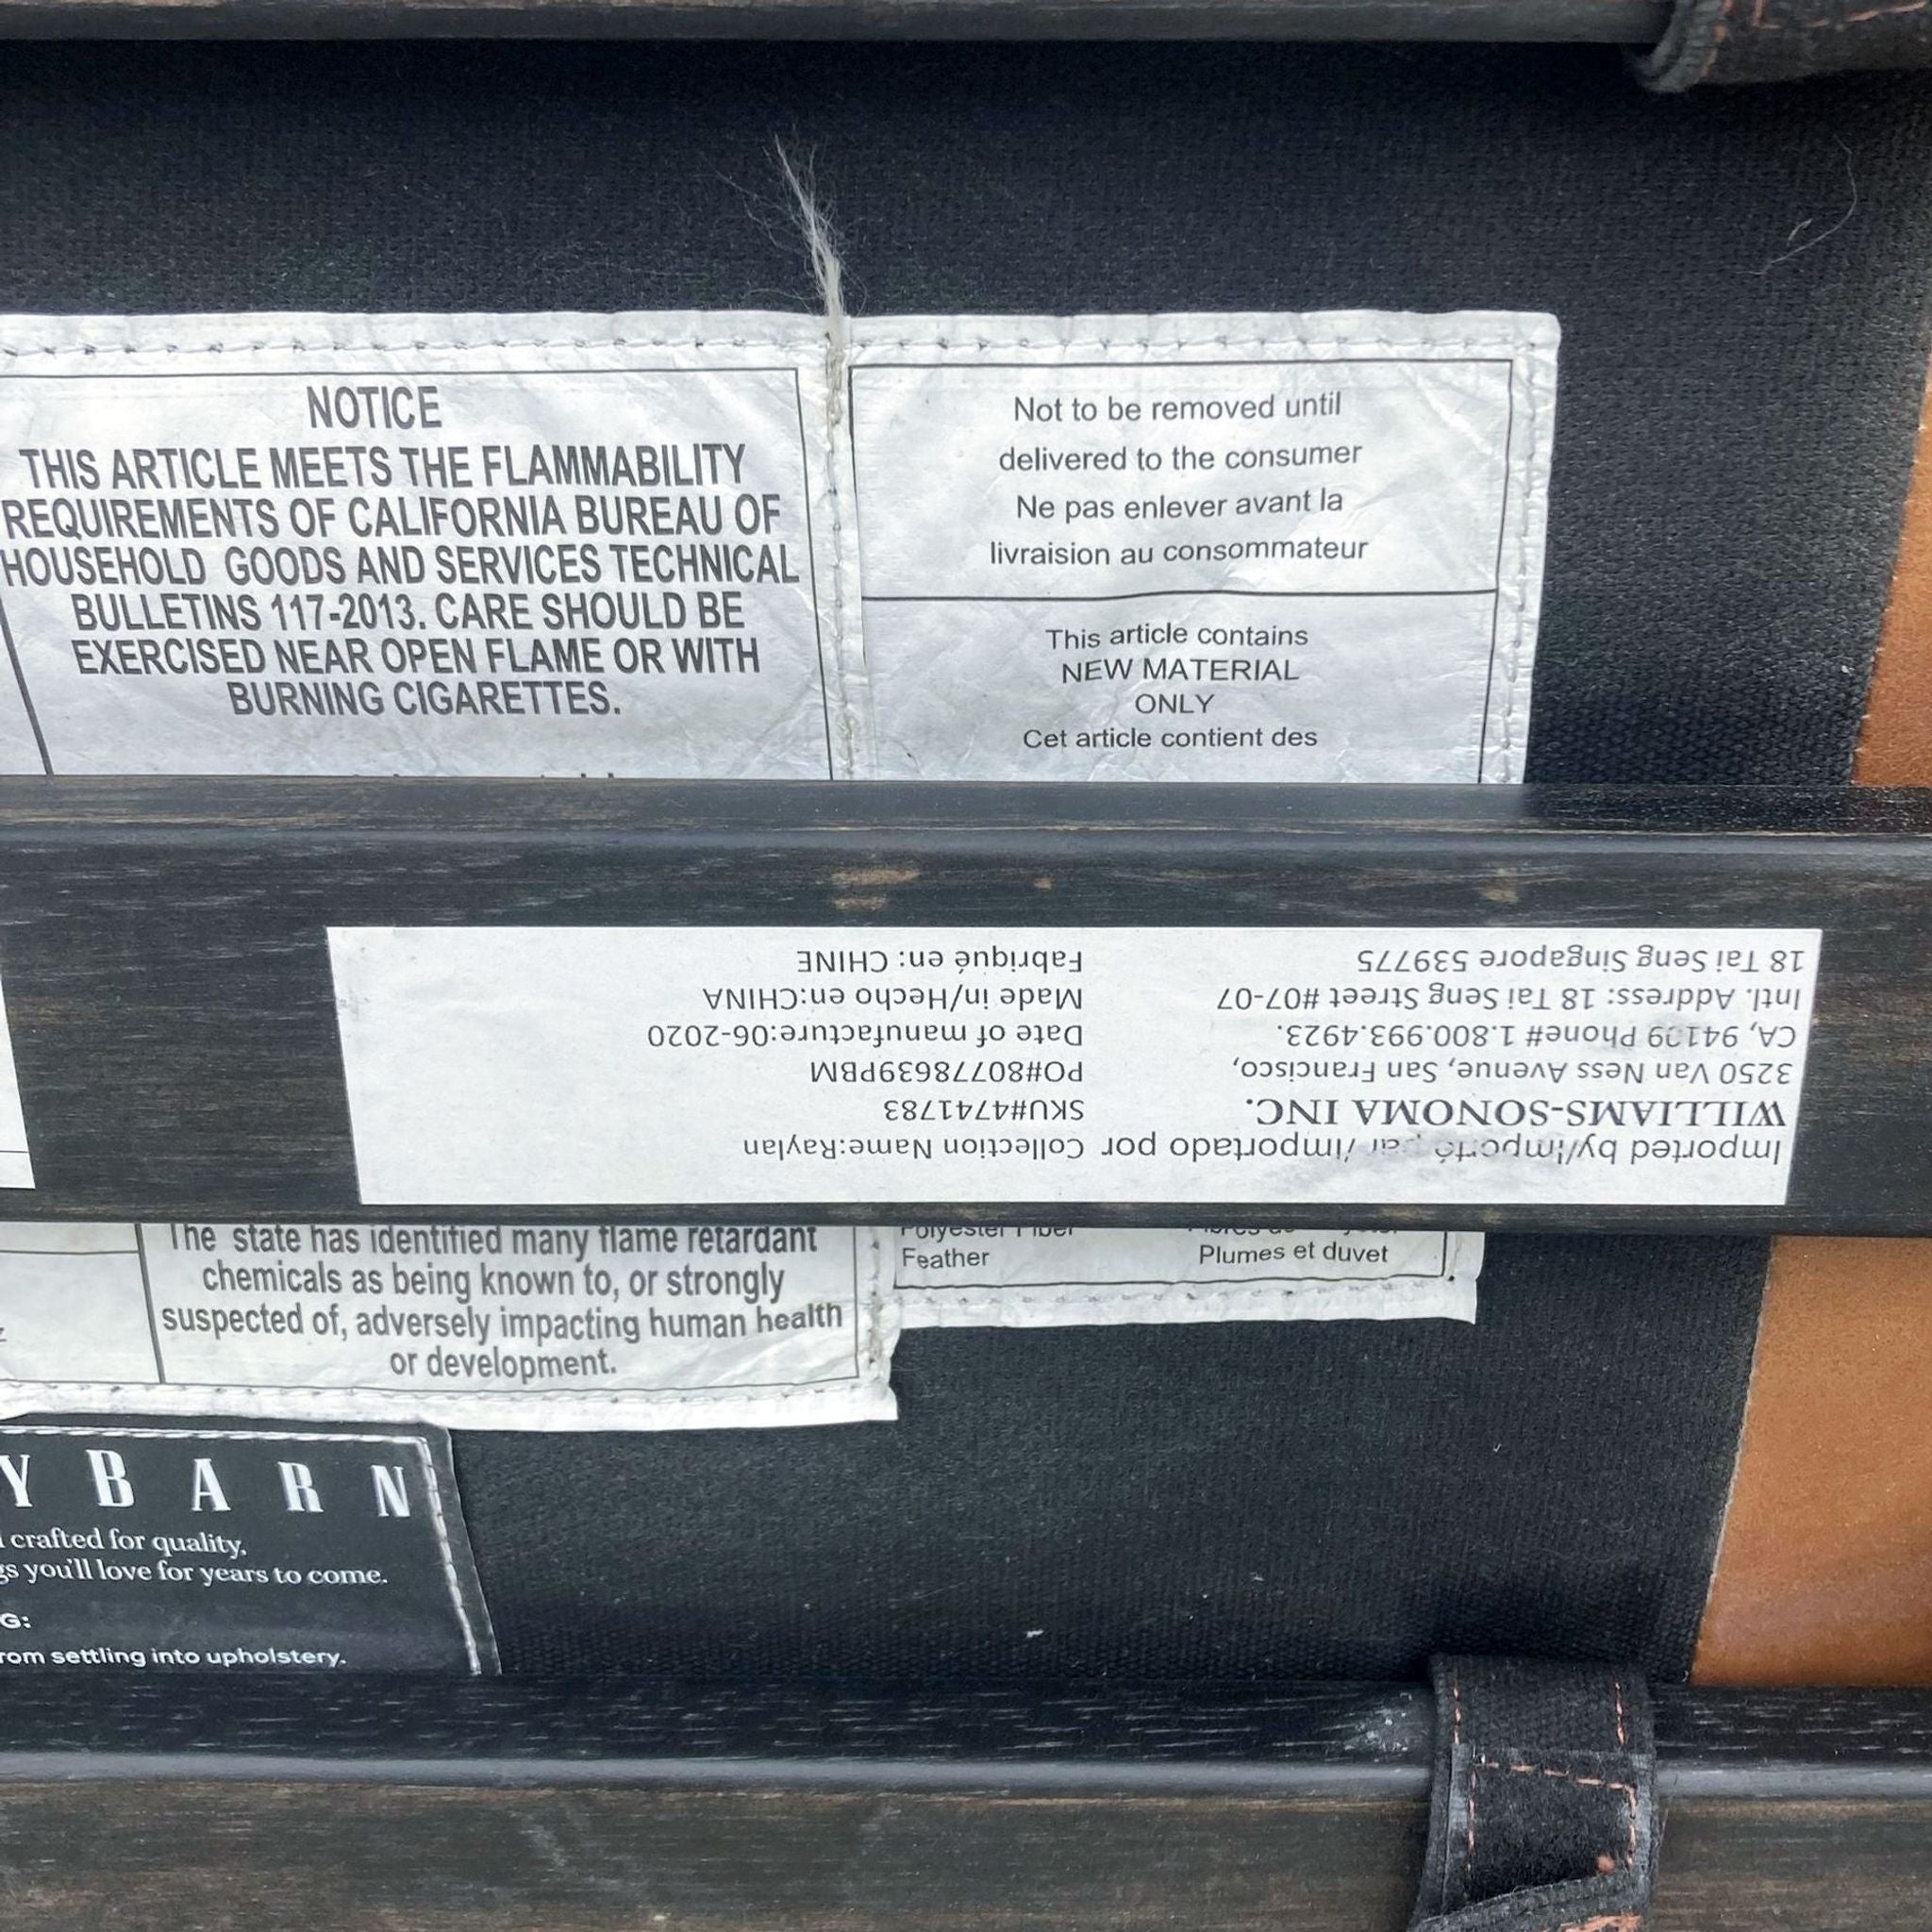 3. "Underside view of a Pottery Barn leather ottoman displaying product information and care labels."